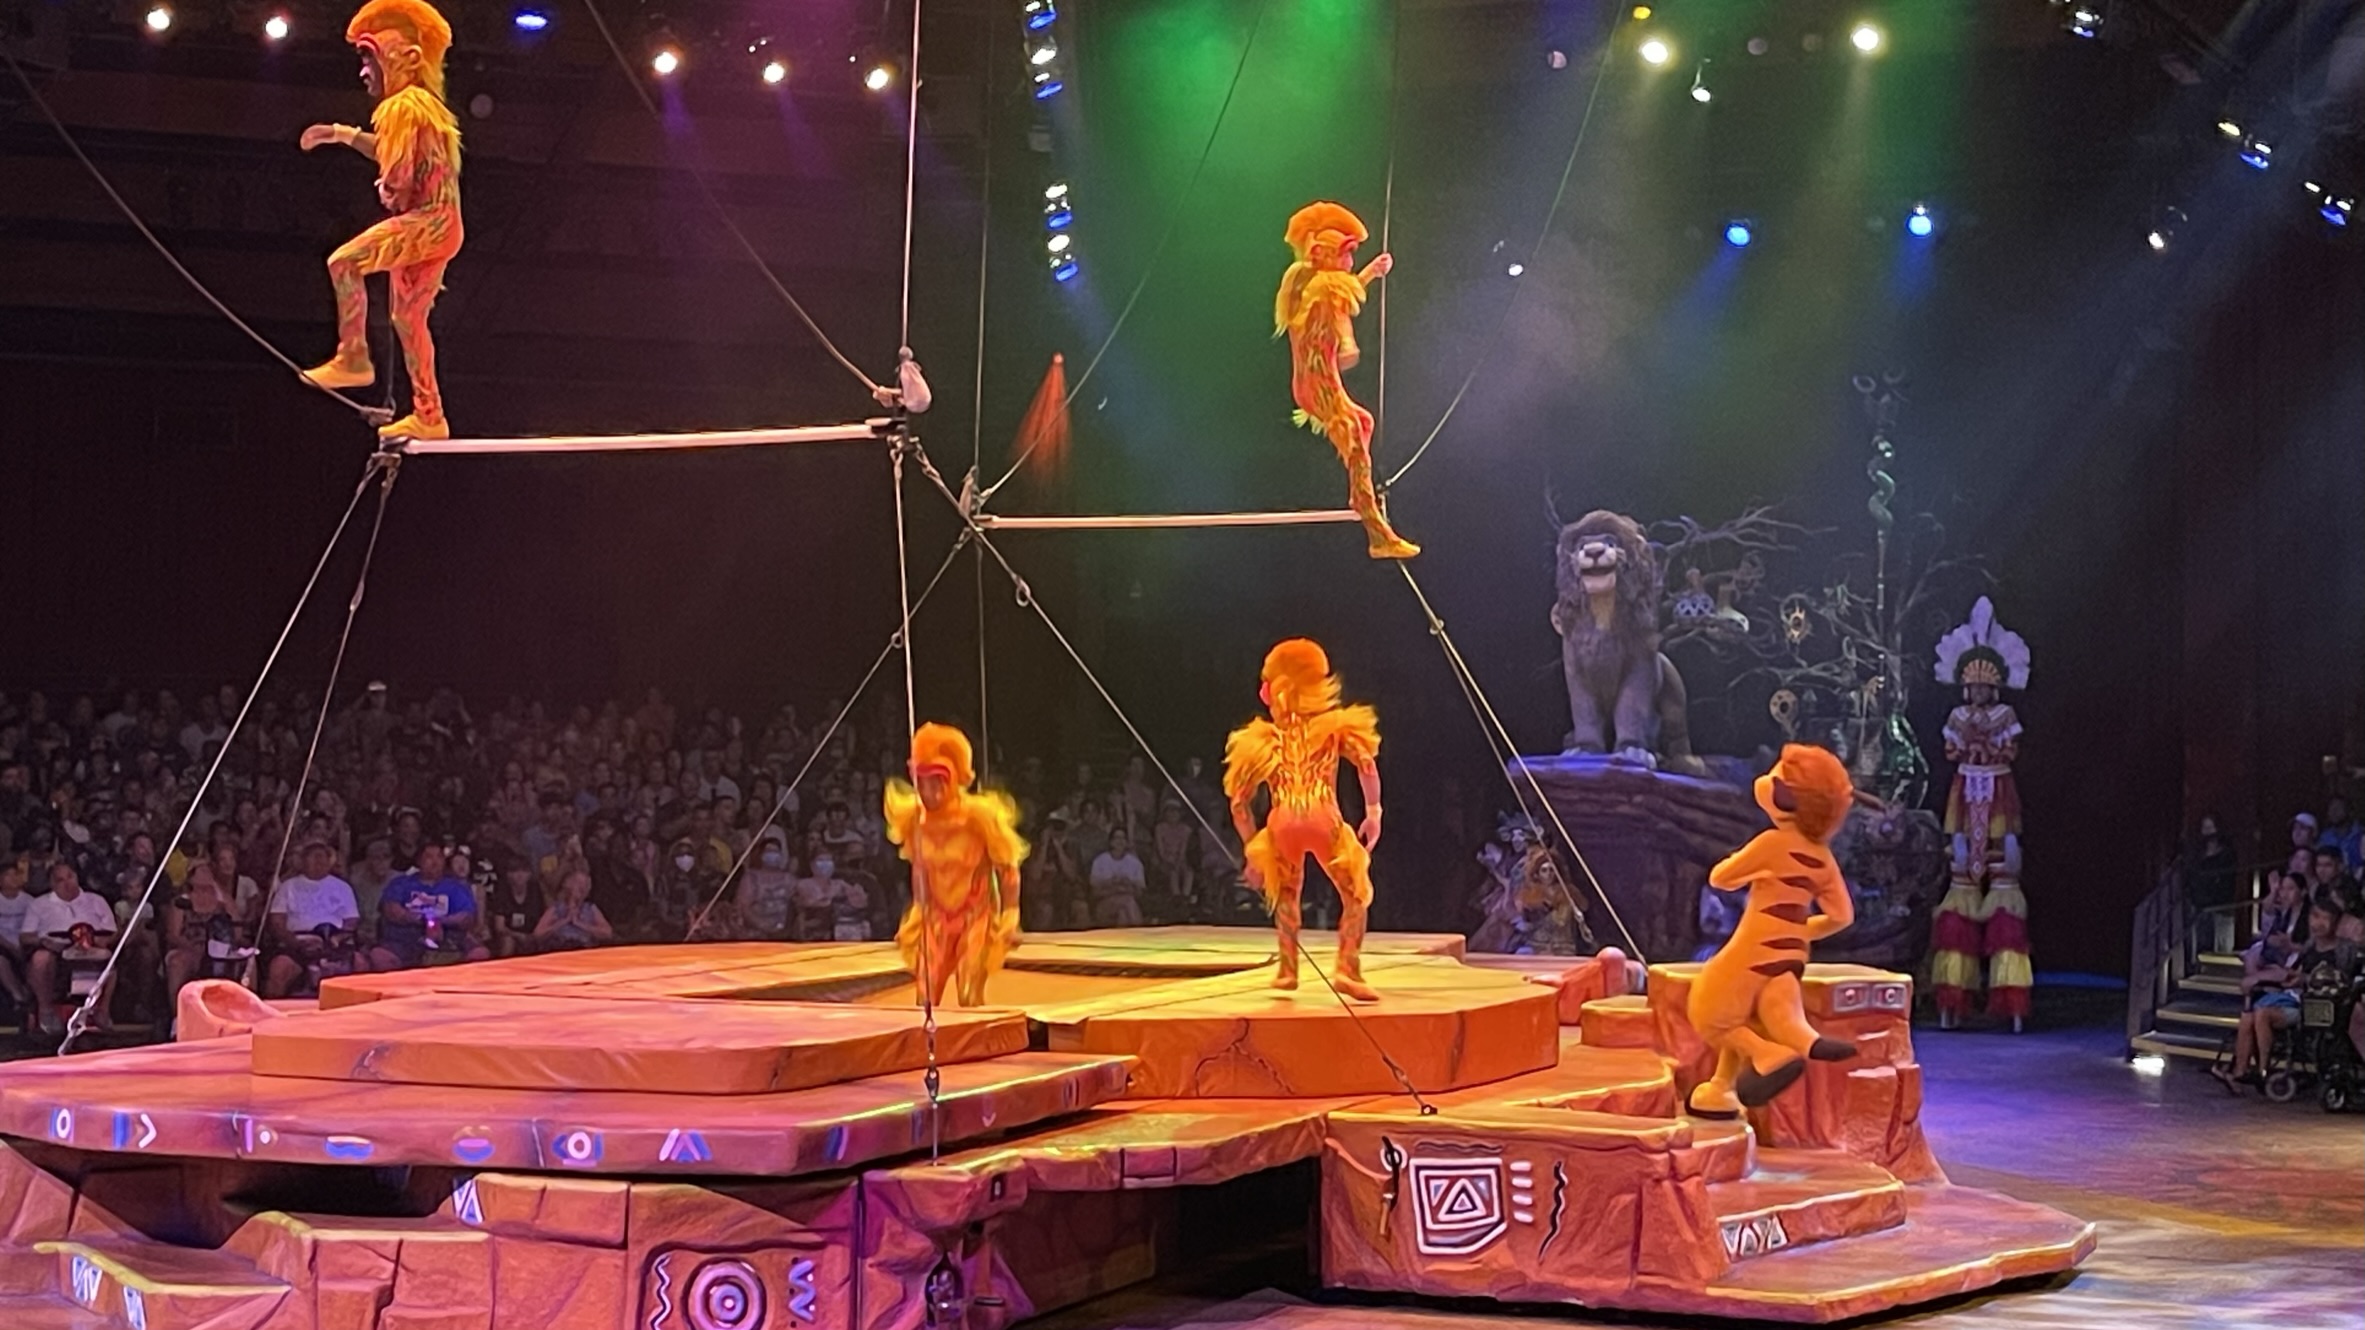 The Festival of the Lion King July 2022